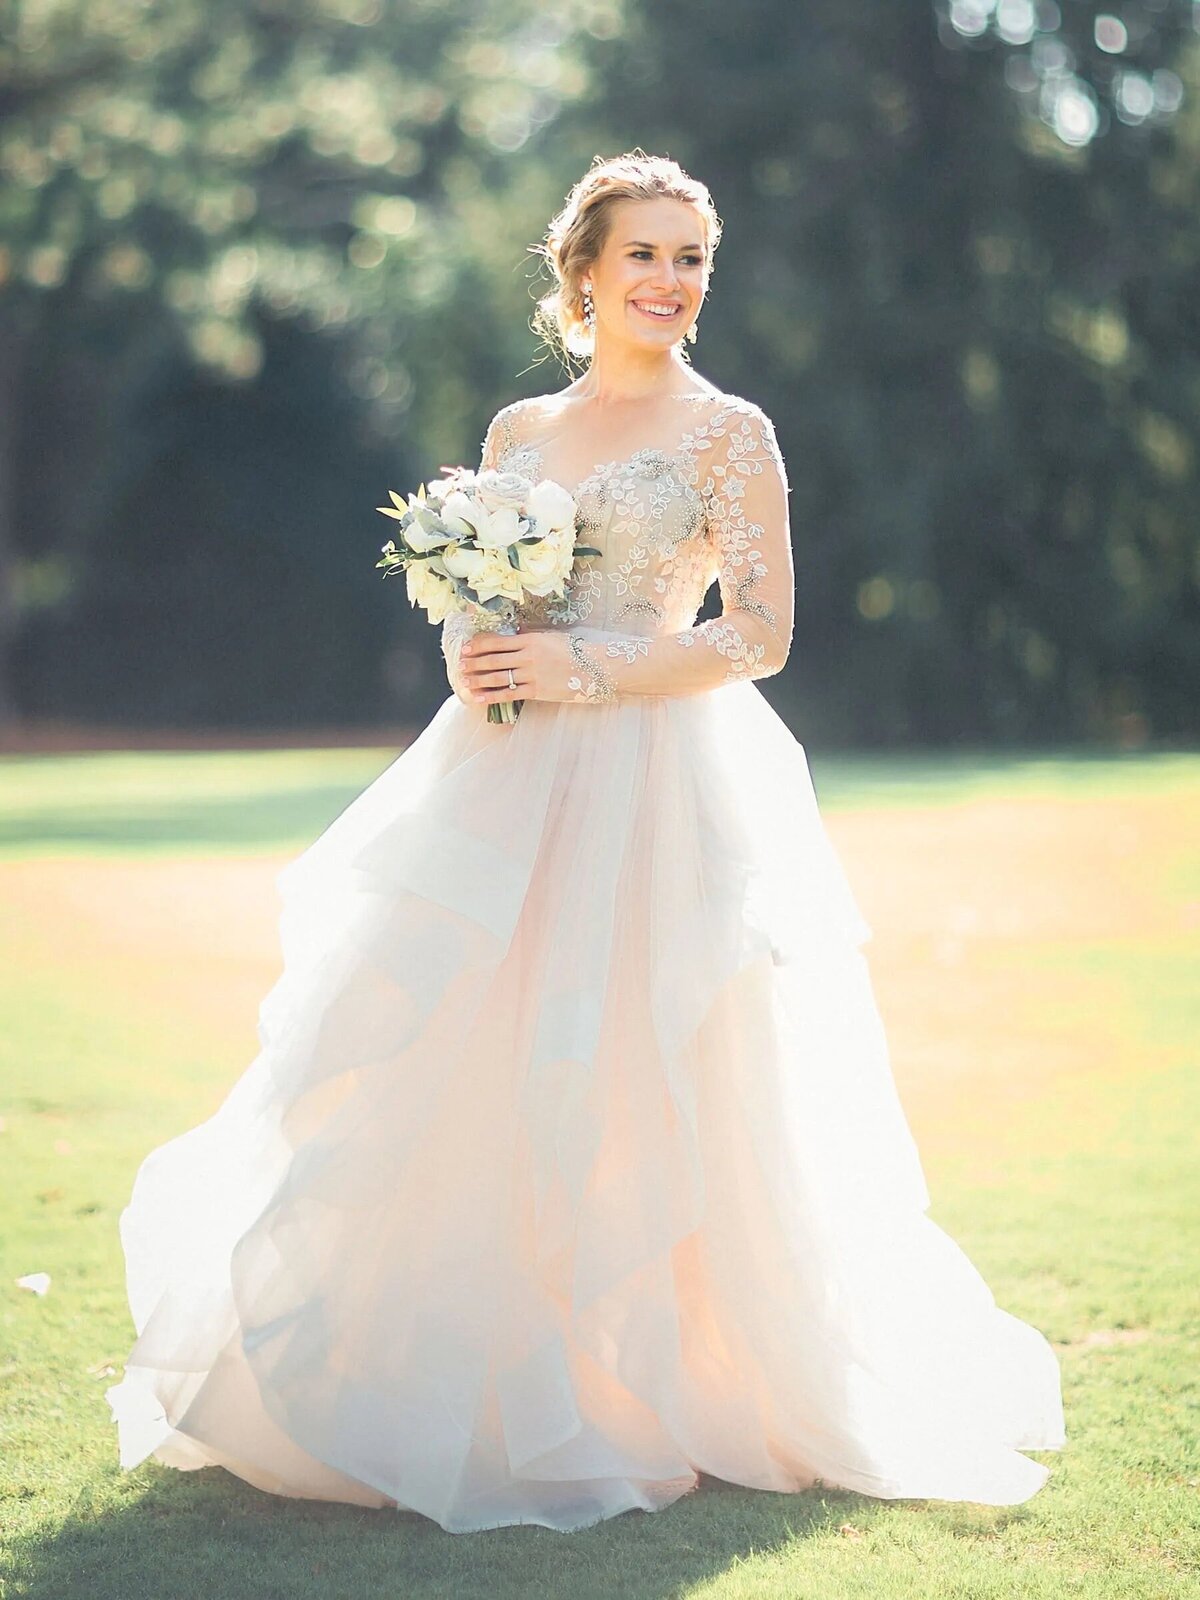 A bride smiling and looking off to the side while holding a bouquet